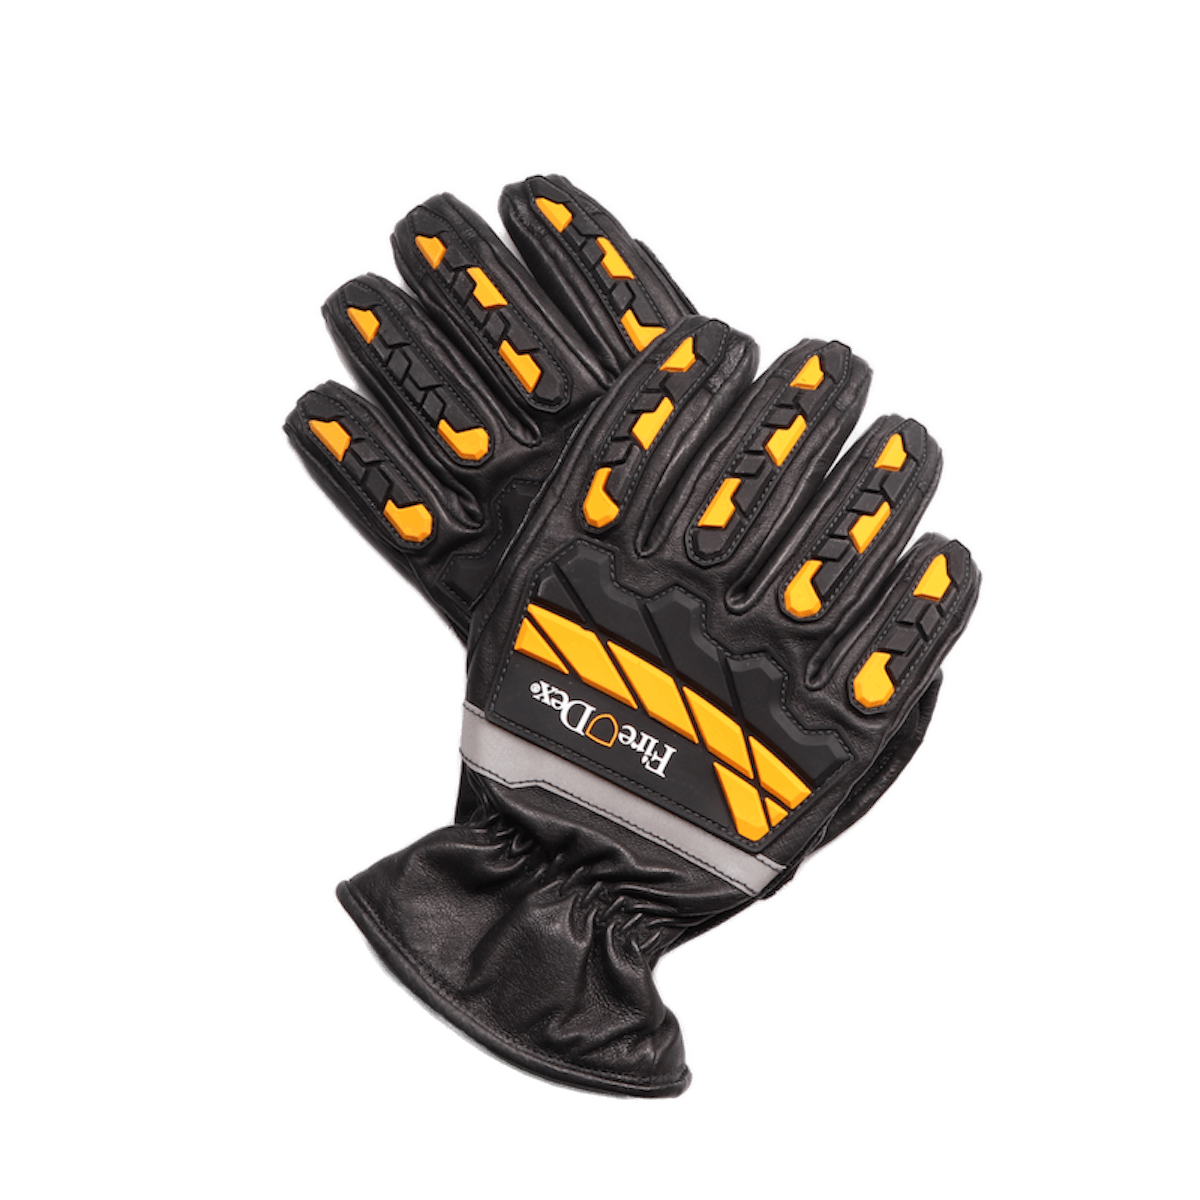 Fire-Dex Launches the First-Ever NFPA 1951 Certified Technical Rescue Glove